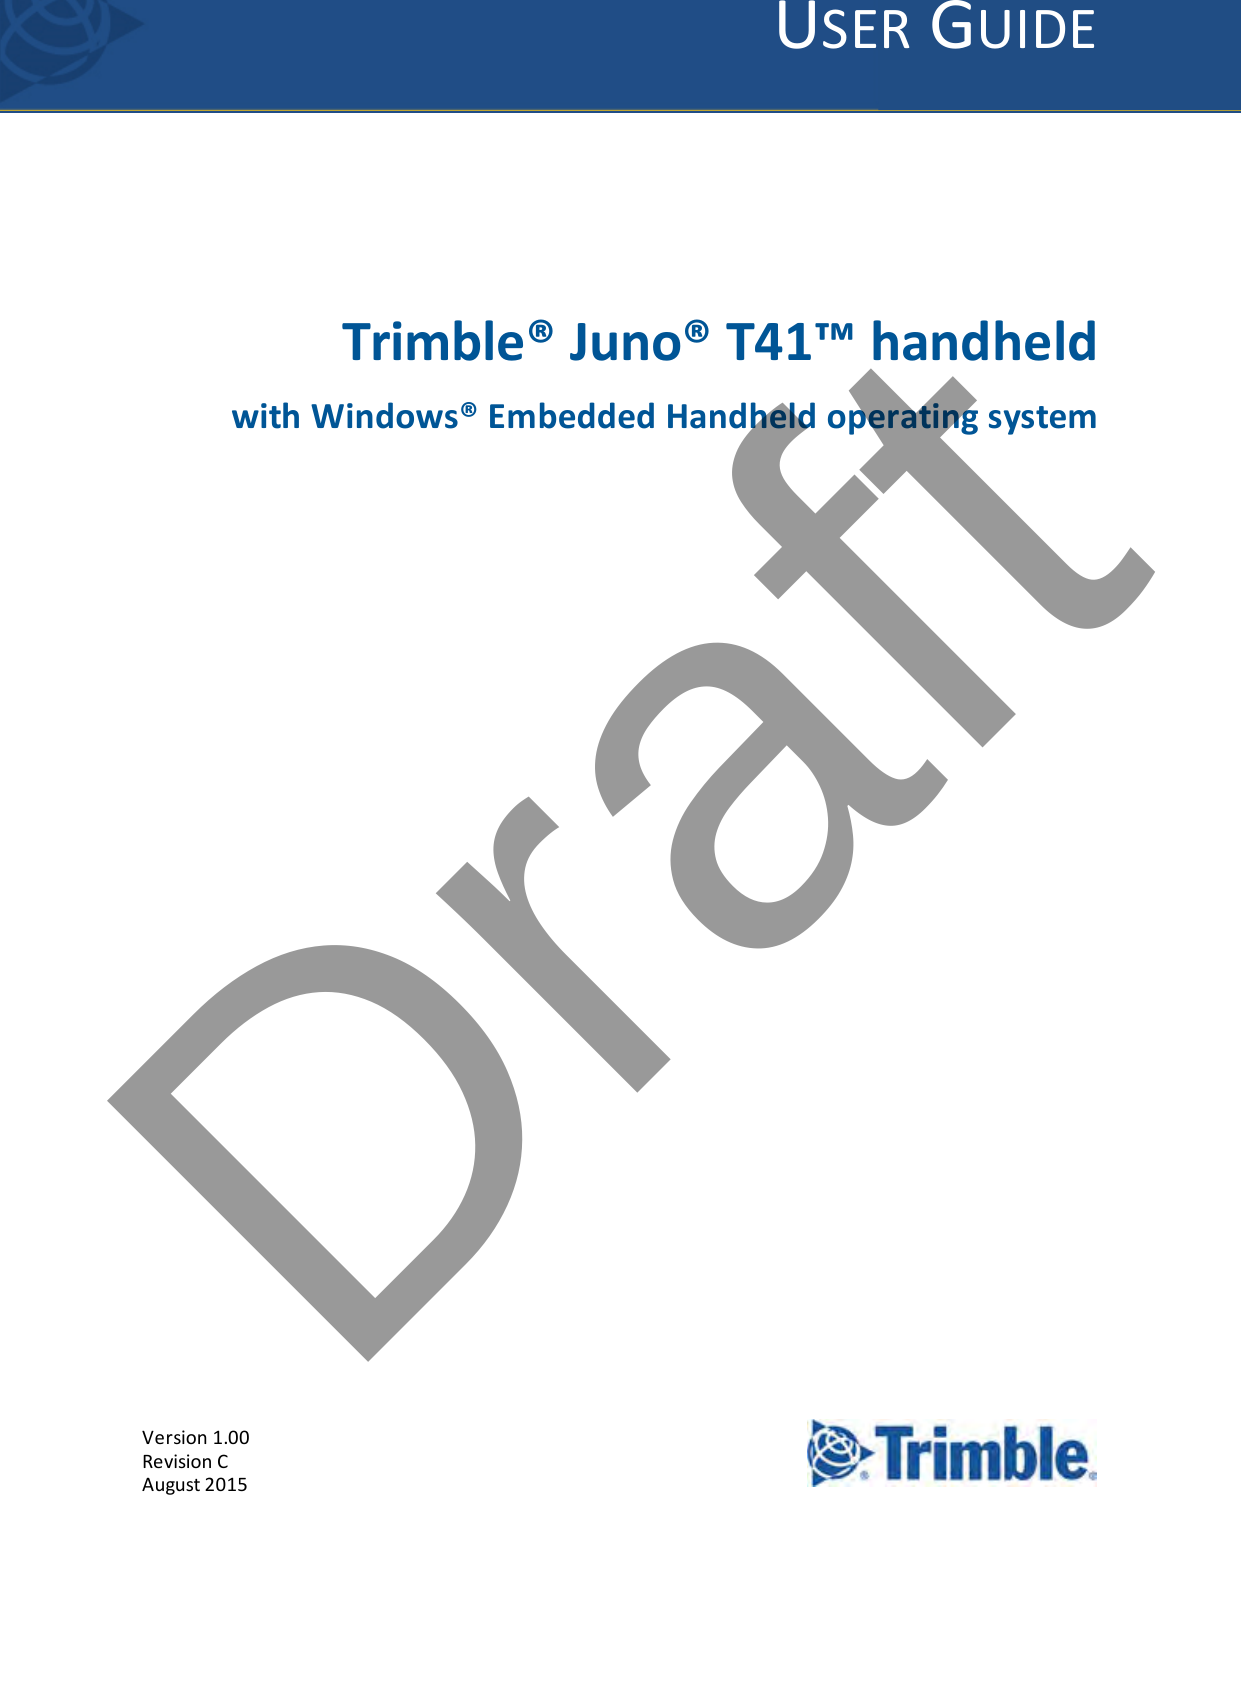 Version 1.00Revision CAugust 2015USER GUIDETrimble® Juno® T41™ handheldwith Windows® Embedded Handheld operating system1Draft